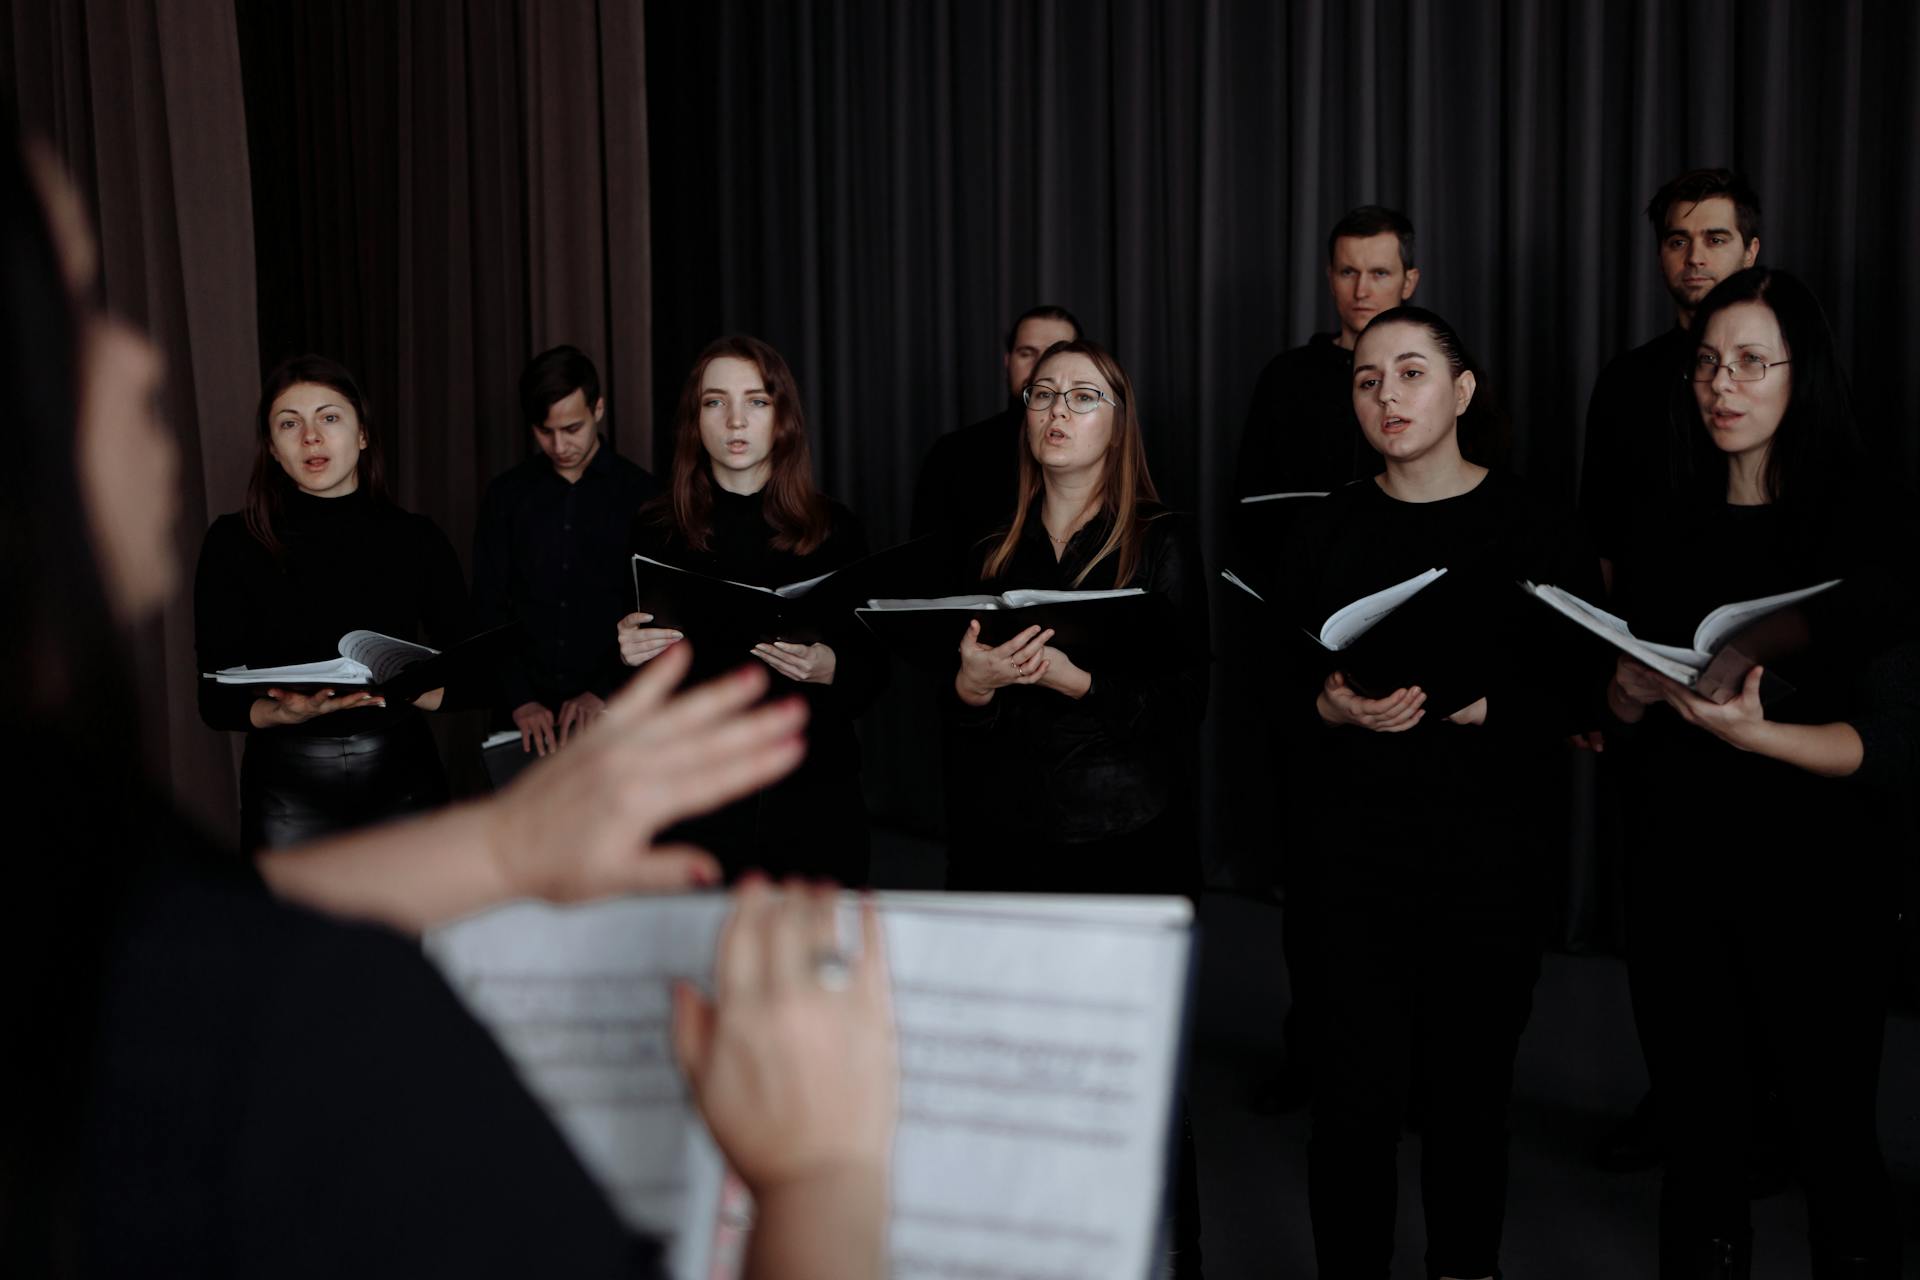 A Choir Singing while Holding Music Sheets